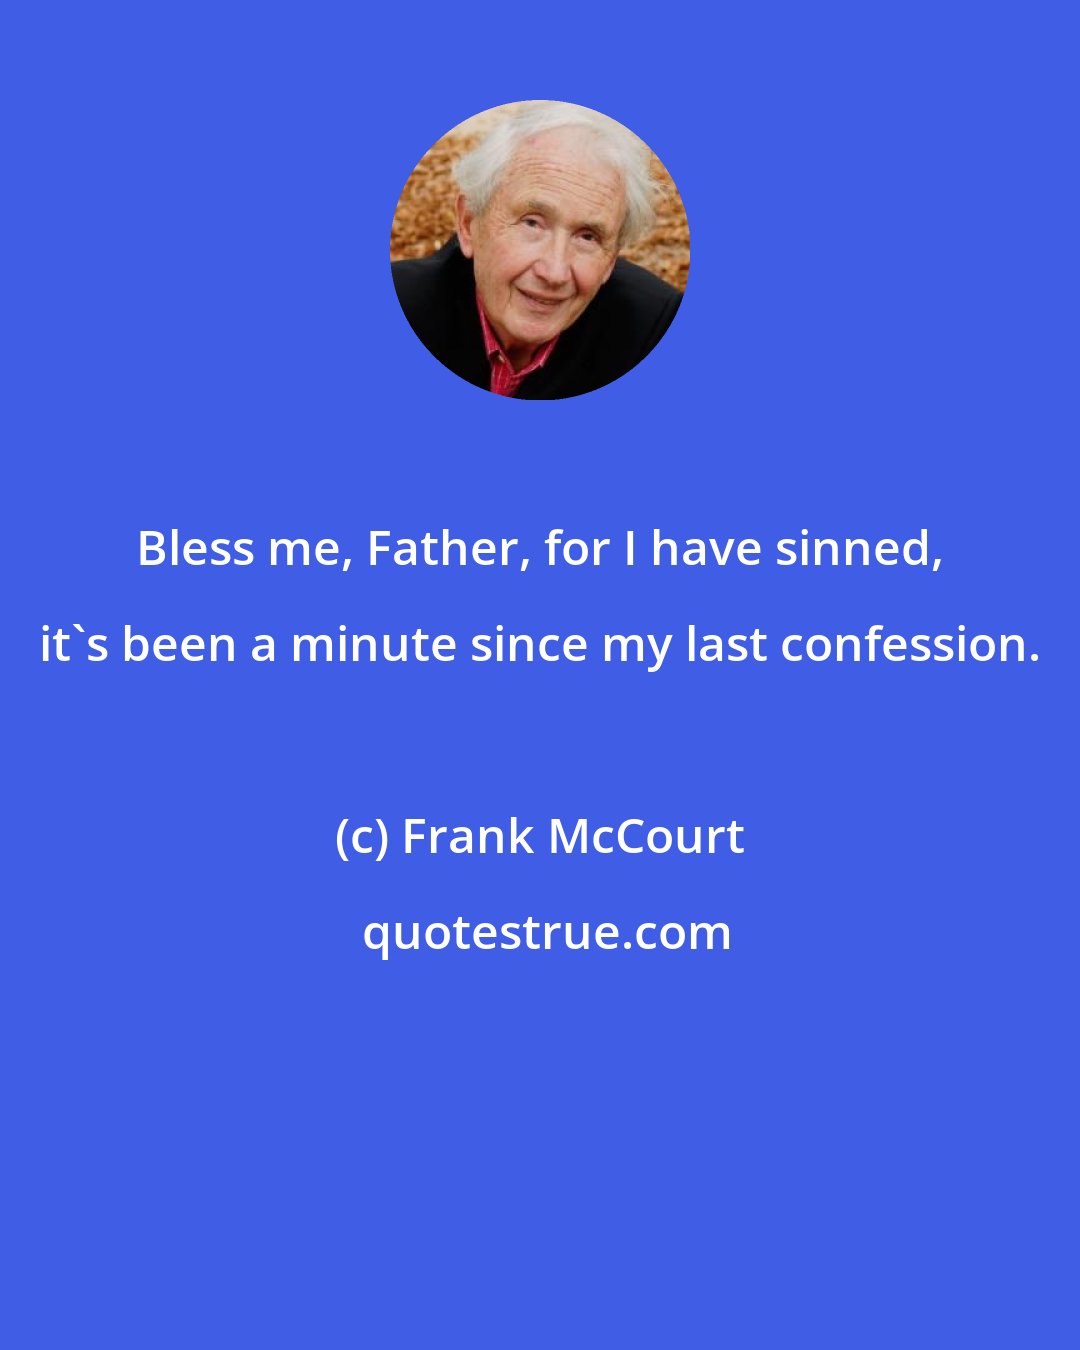 Frank McCourt: Bless me, Father, for I have sinned, it's been a minute since my last confession.